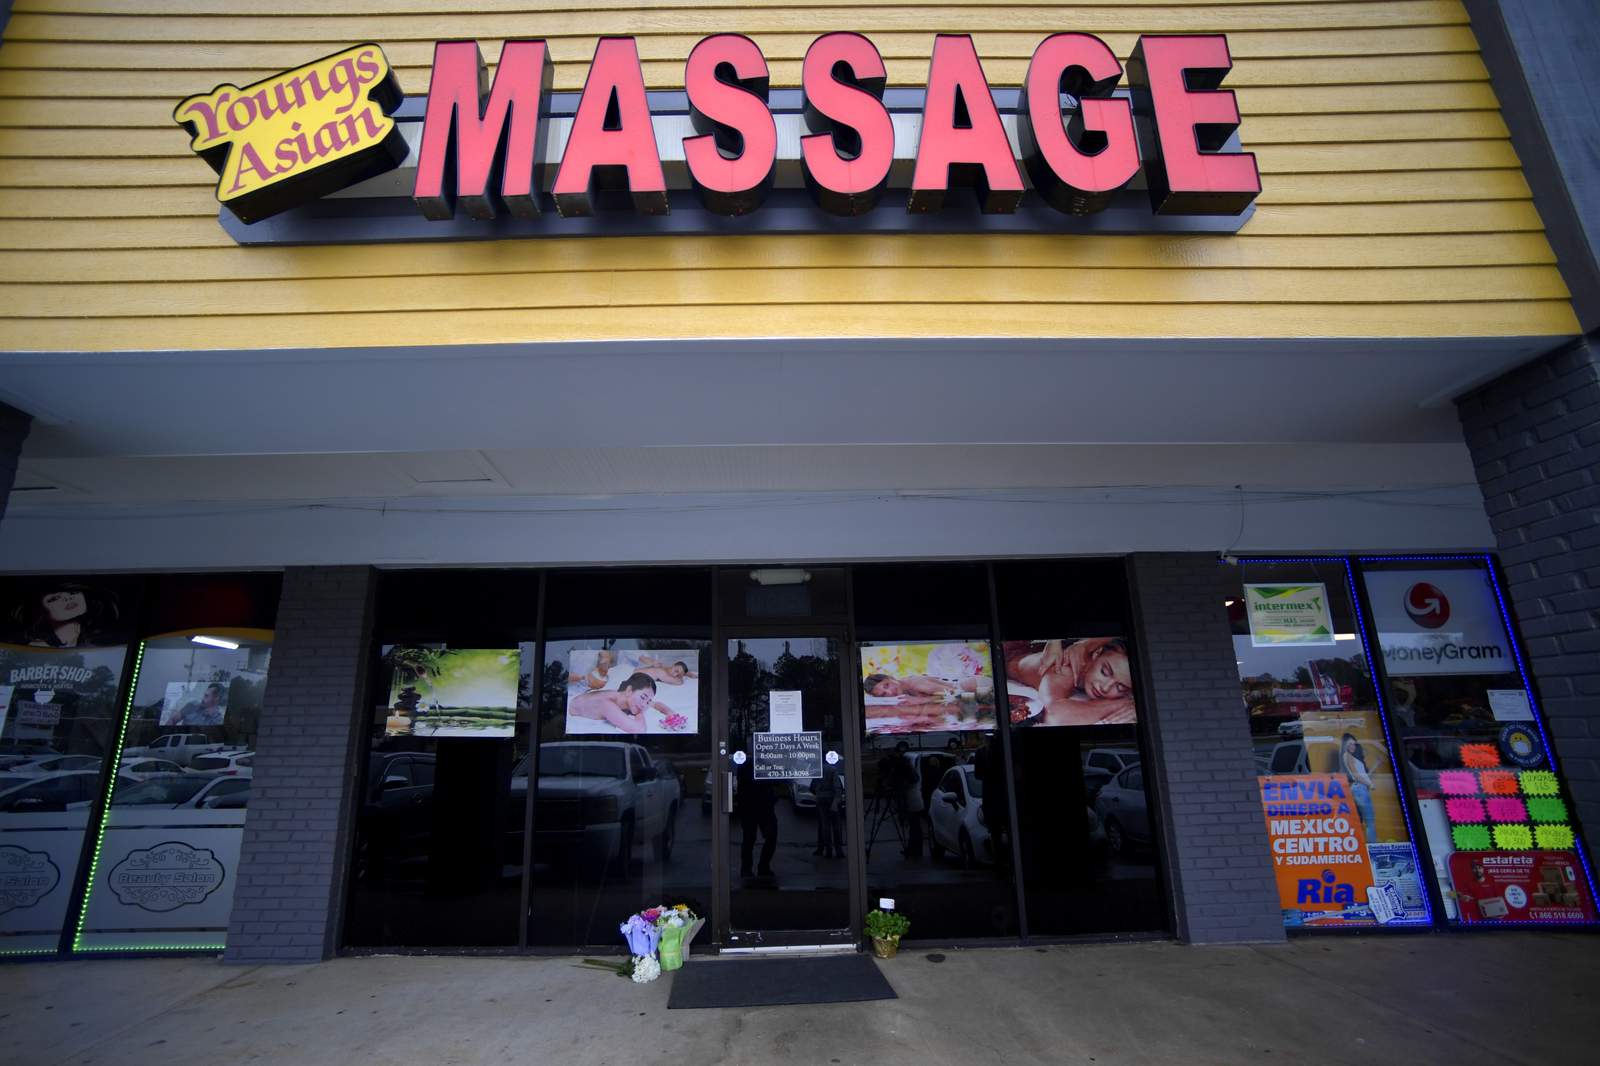 Suspected massage parlor gunman claims to have a sex addiction